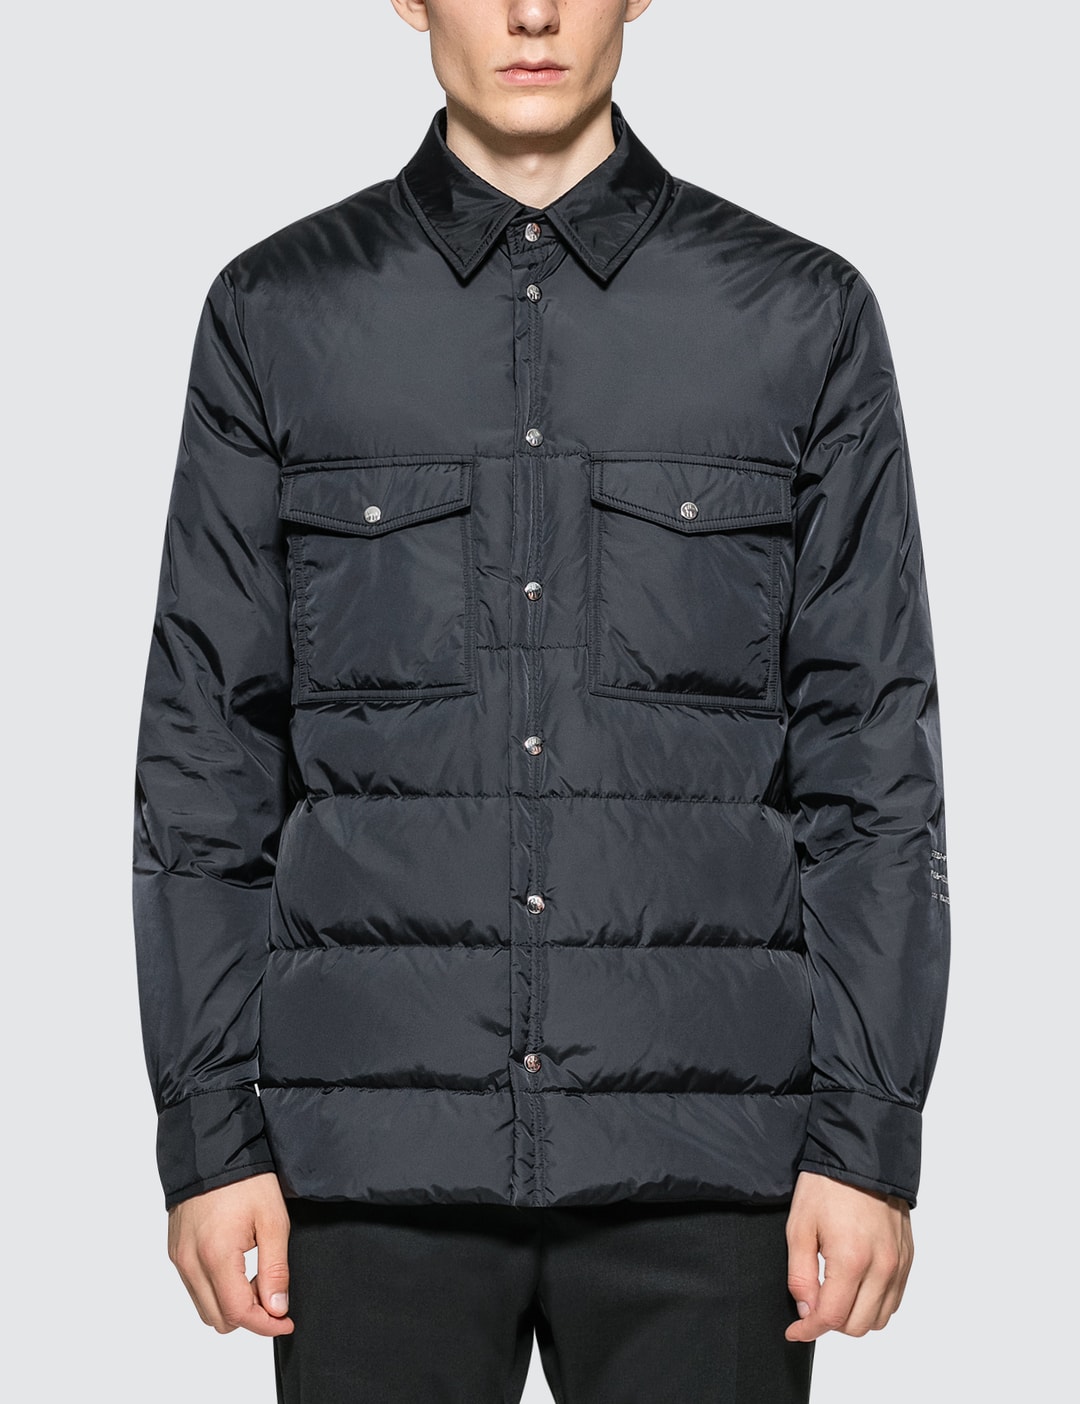 - Maze Curated Fashion Genius Moncler Globally - | Design Fragment Hypebeast by and Moncler Jacket x HBX Lifestyle